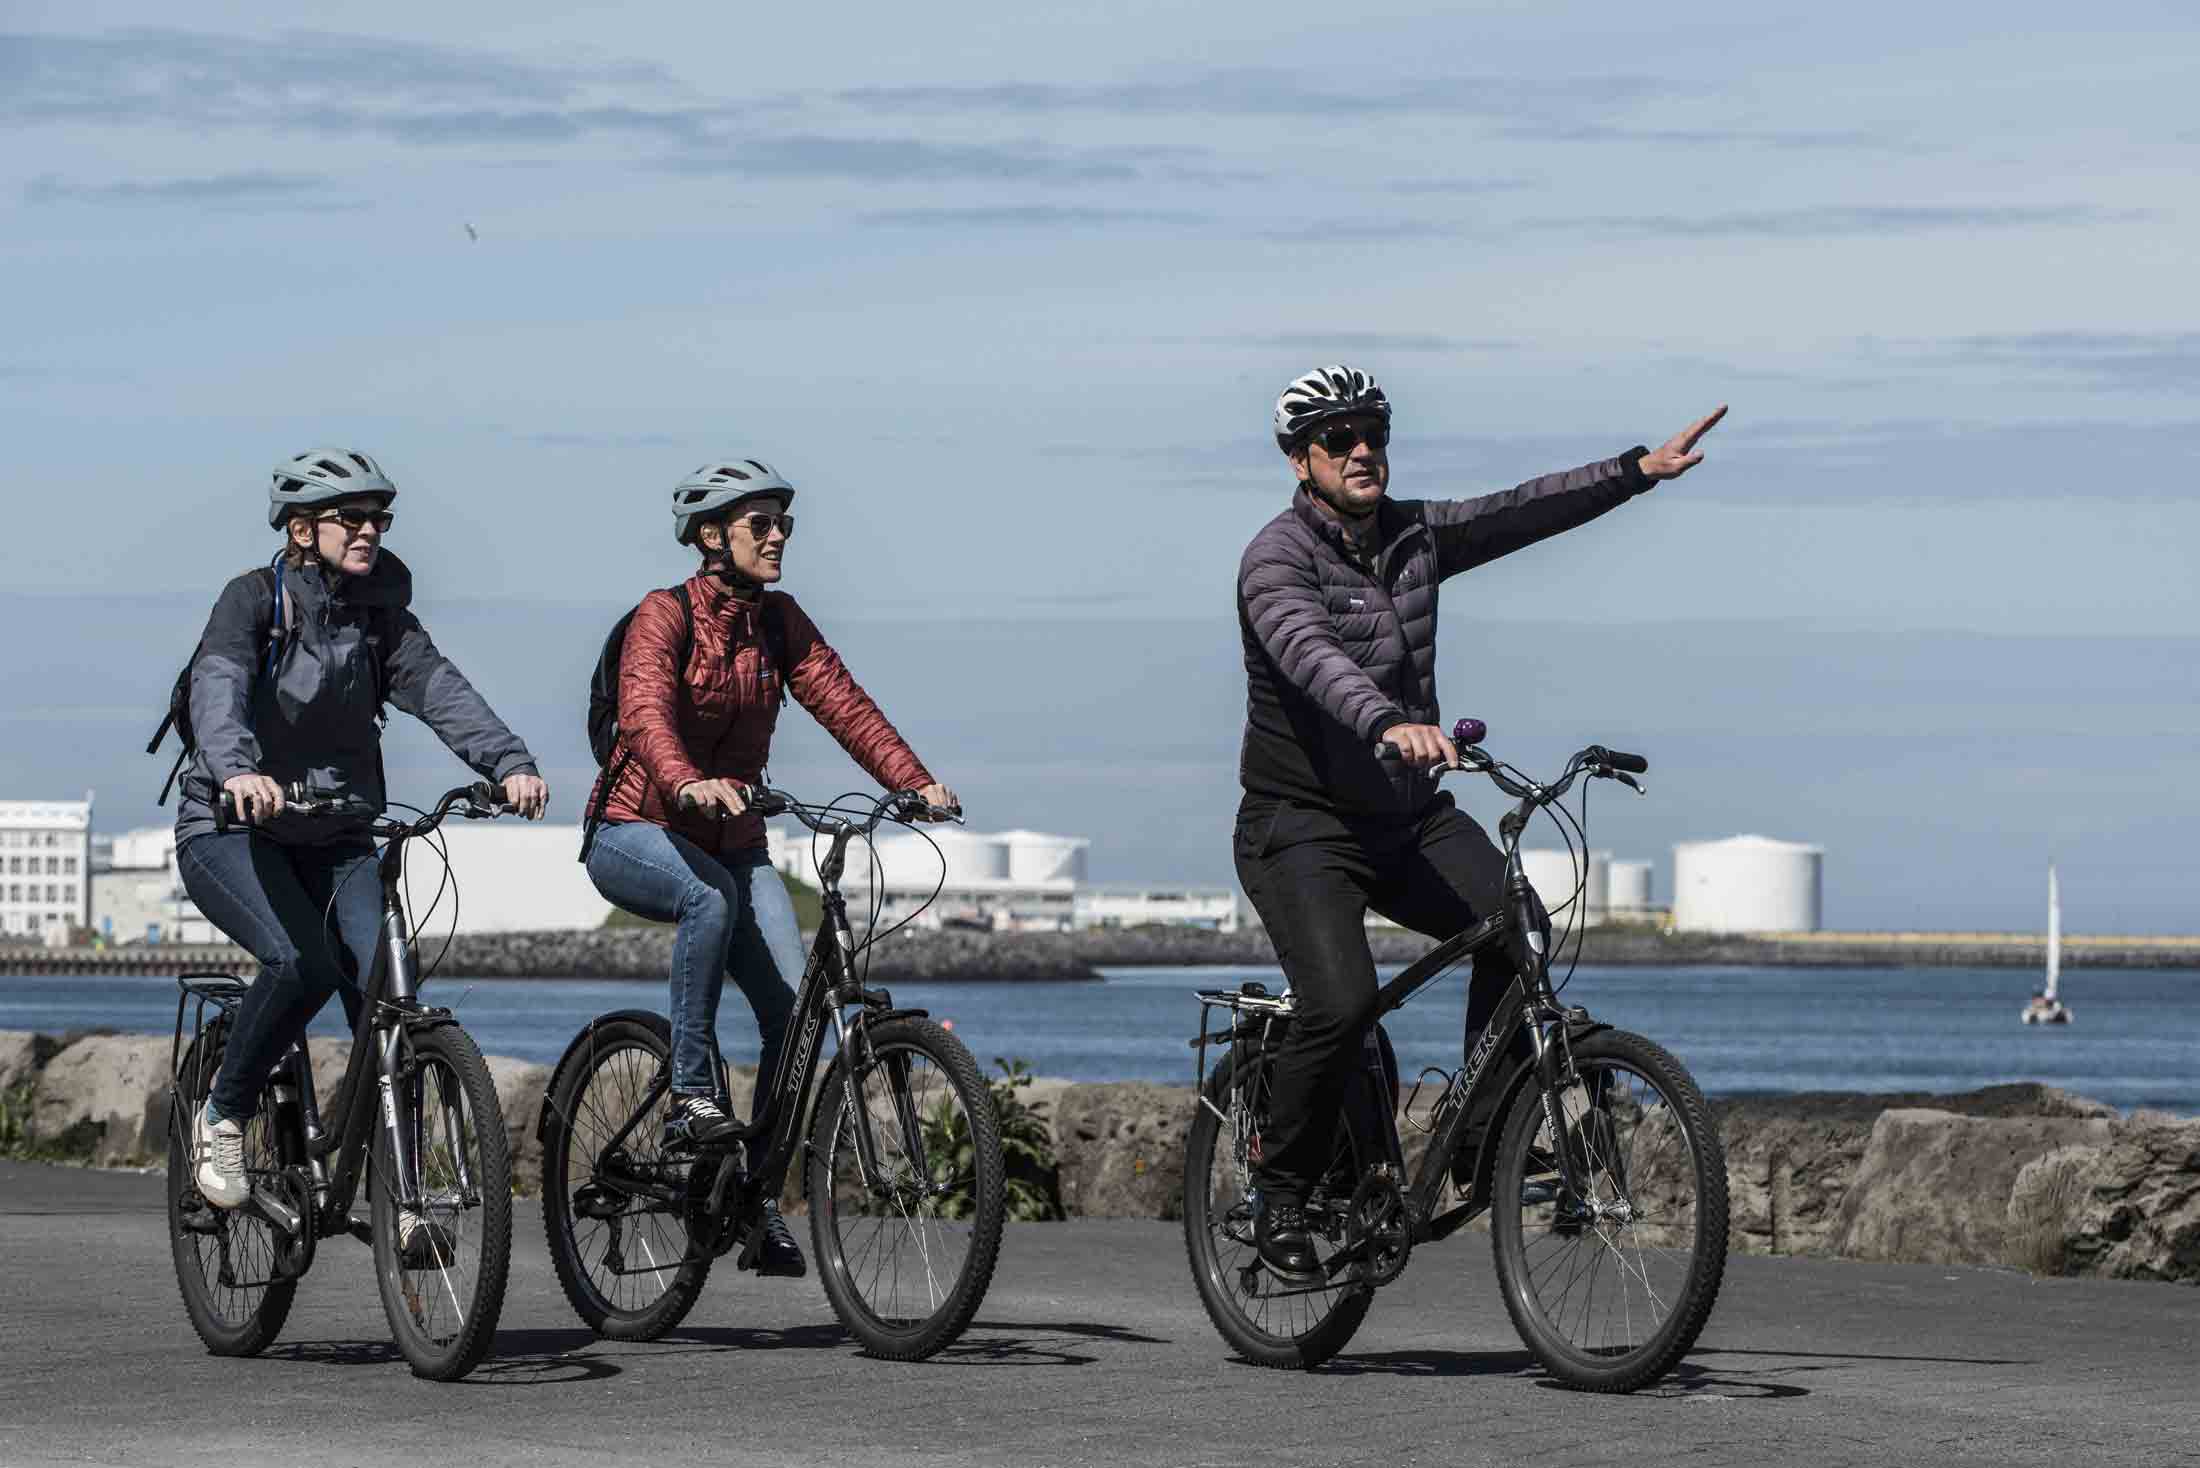 Reykjavik Bike Tour is the best way to see the capital city of Iceland.